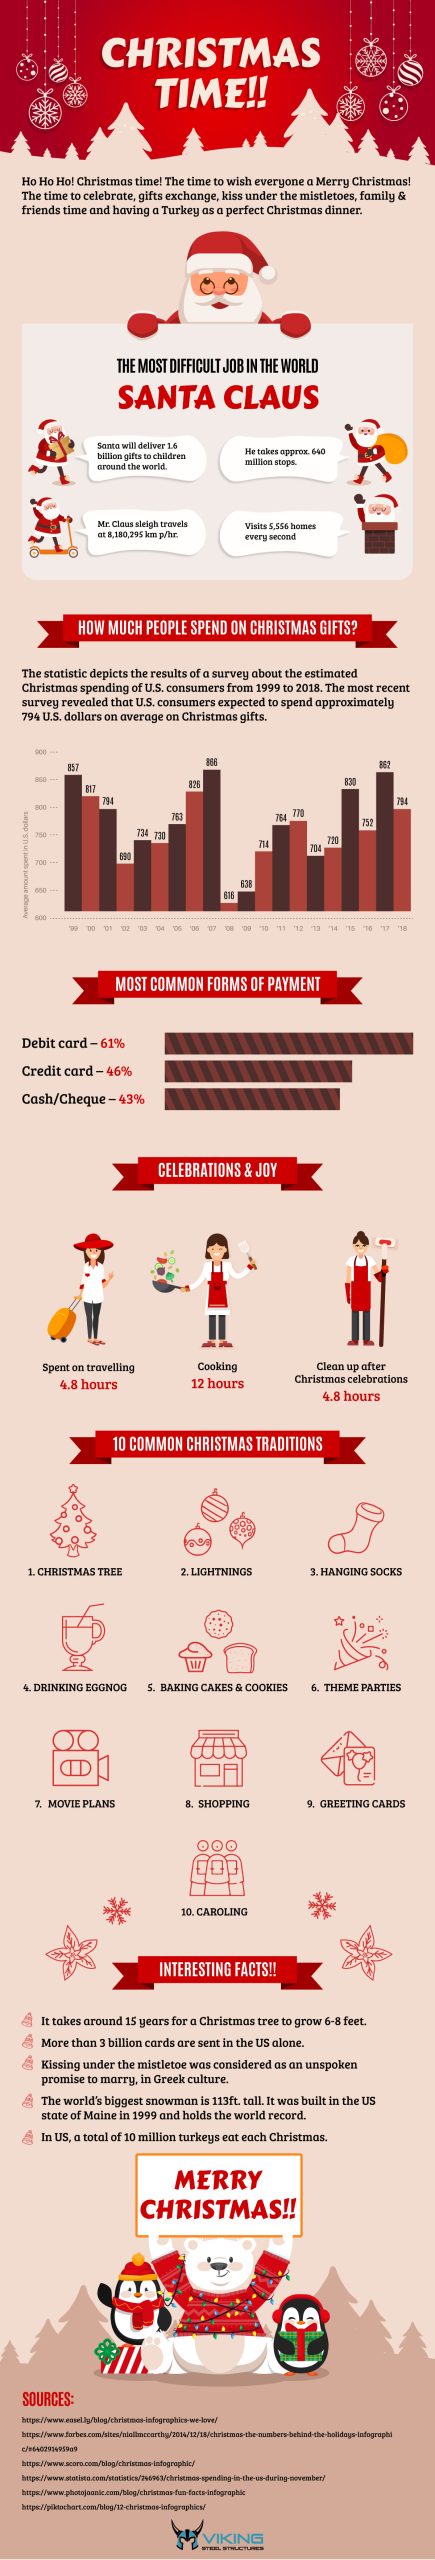 Amazing Christmas Facts [Infographic]